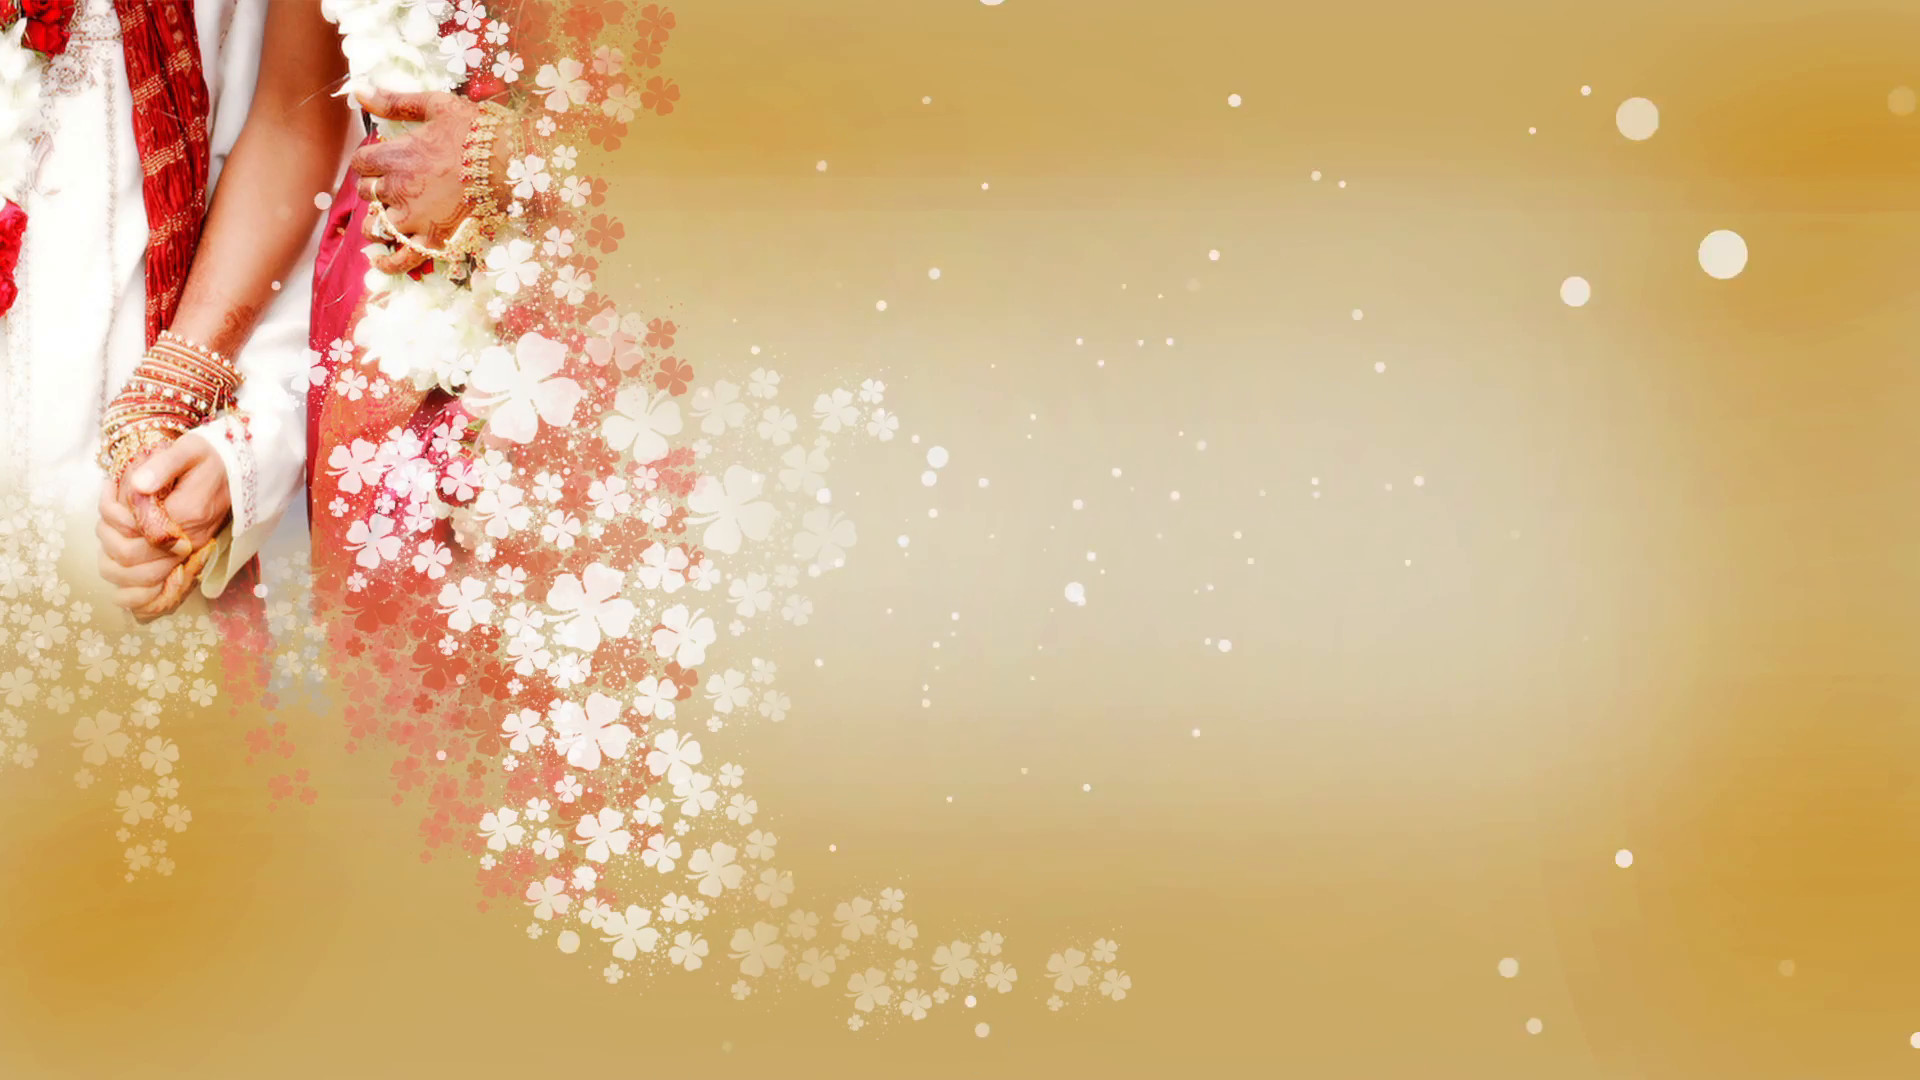 Wedding Backgrounds Wallpapers Group 78 1920x1080